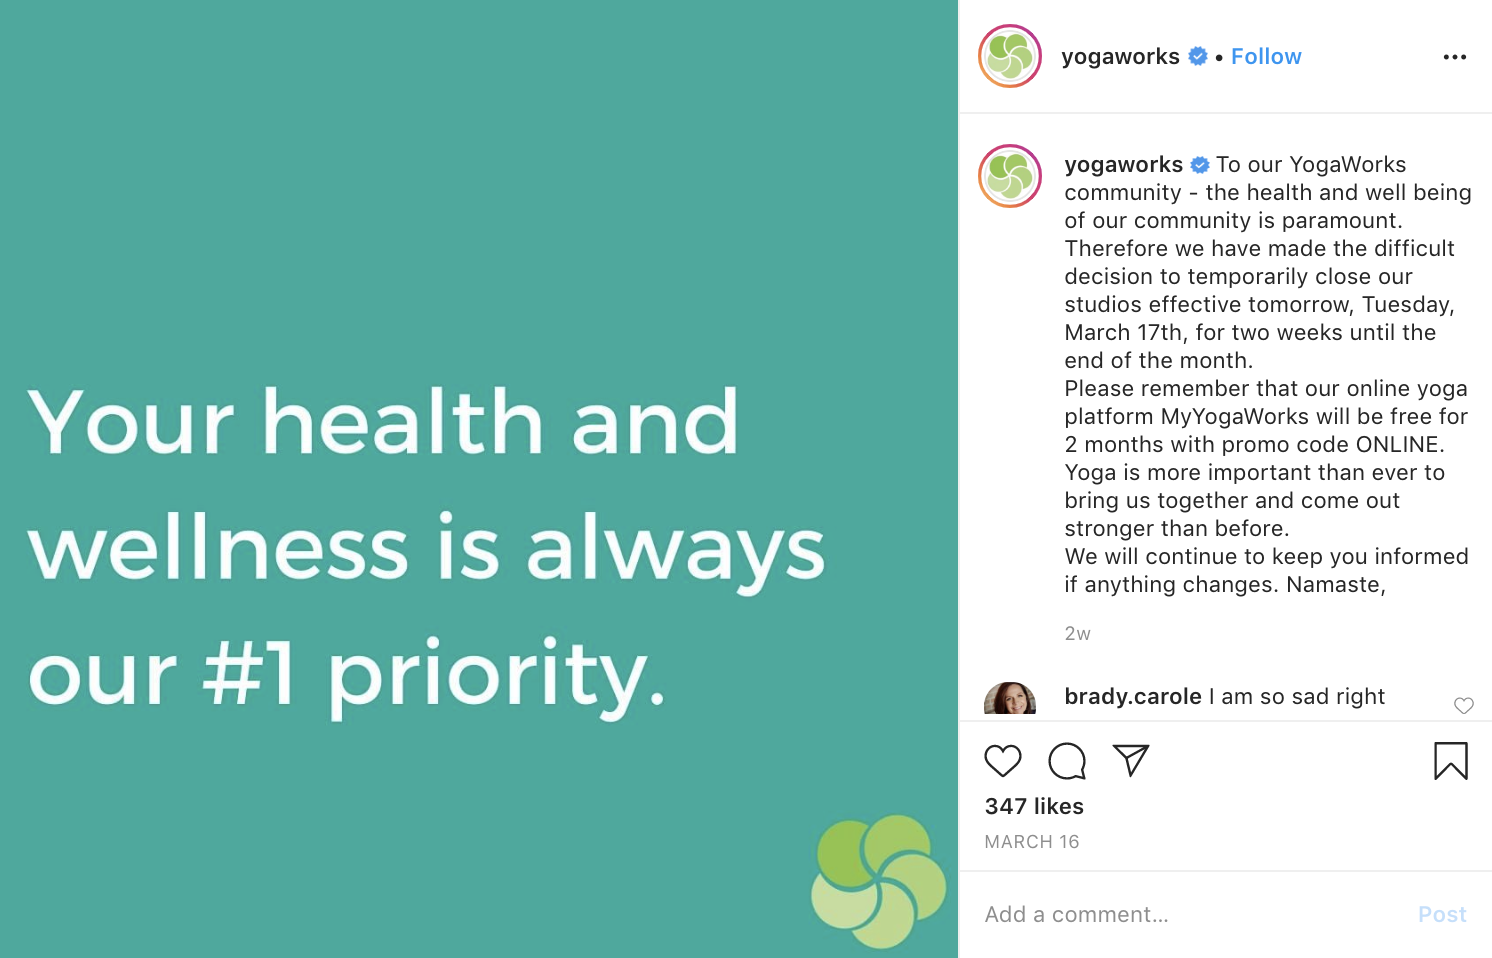 YogaWorks’ studio closure announcement highlighting their app promotion.